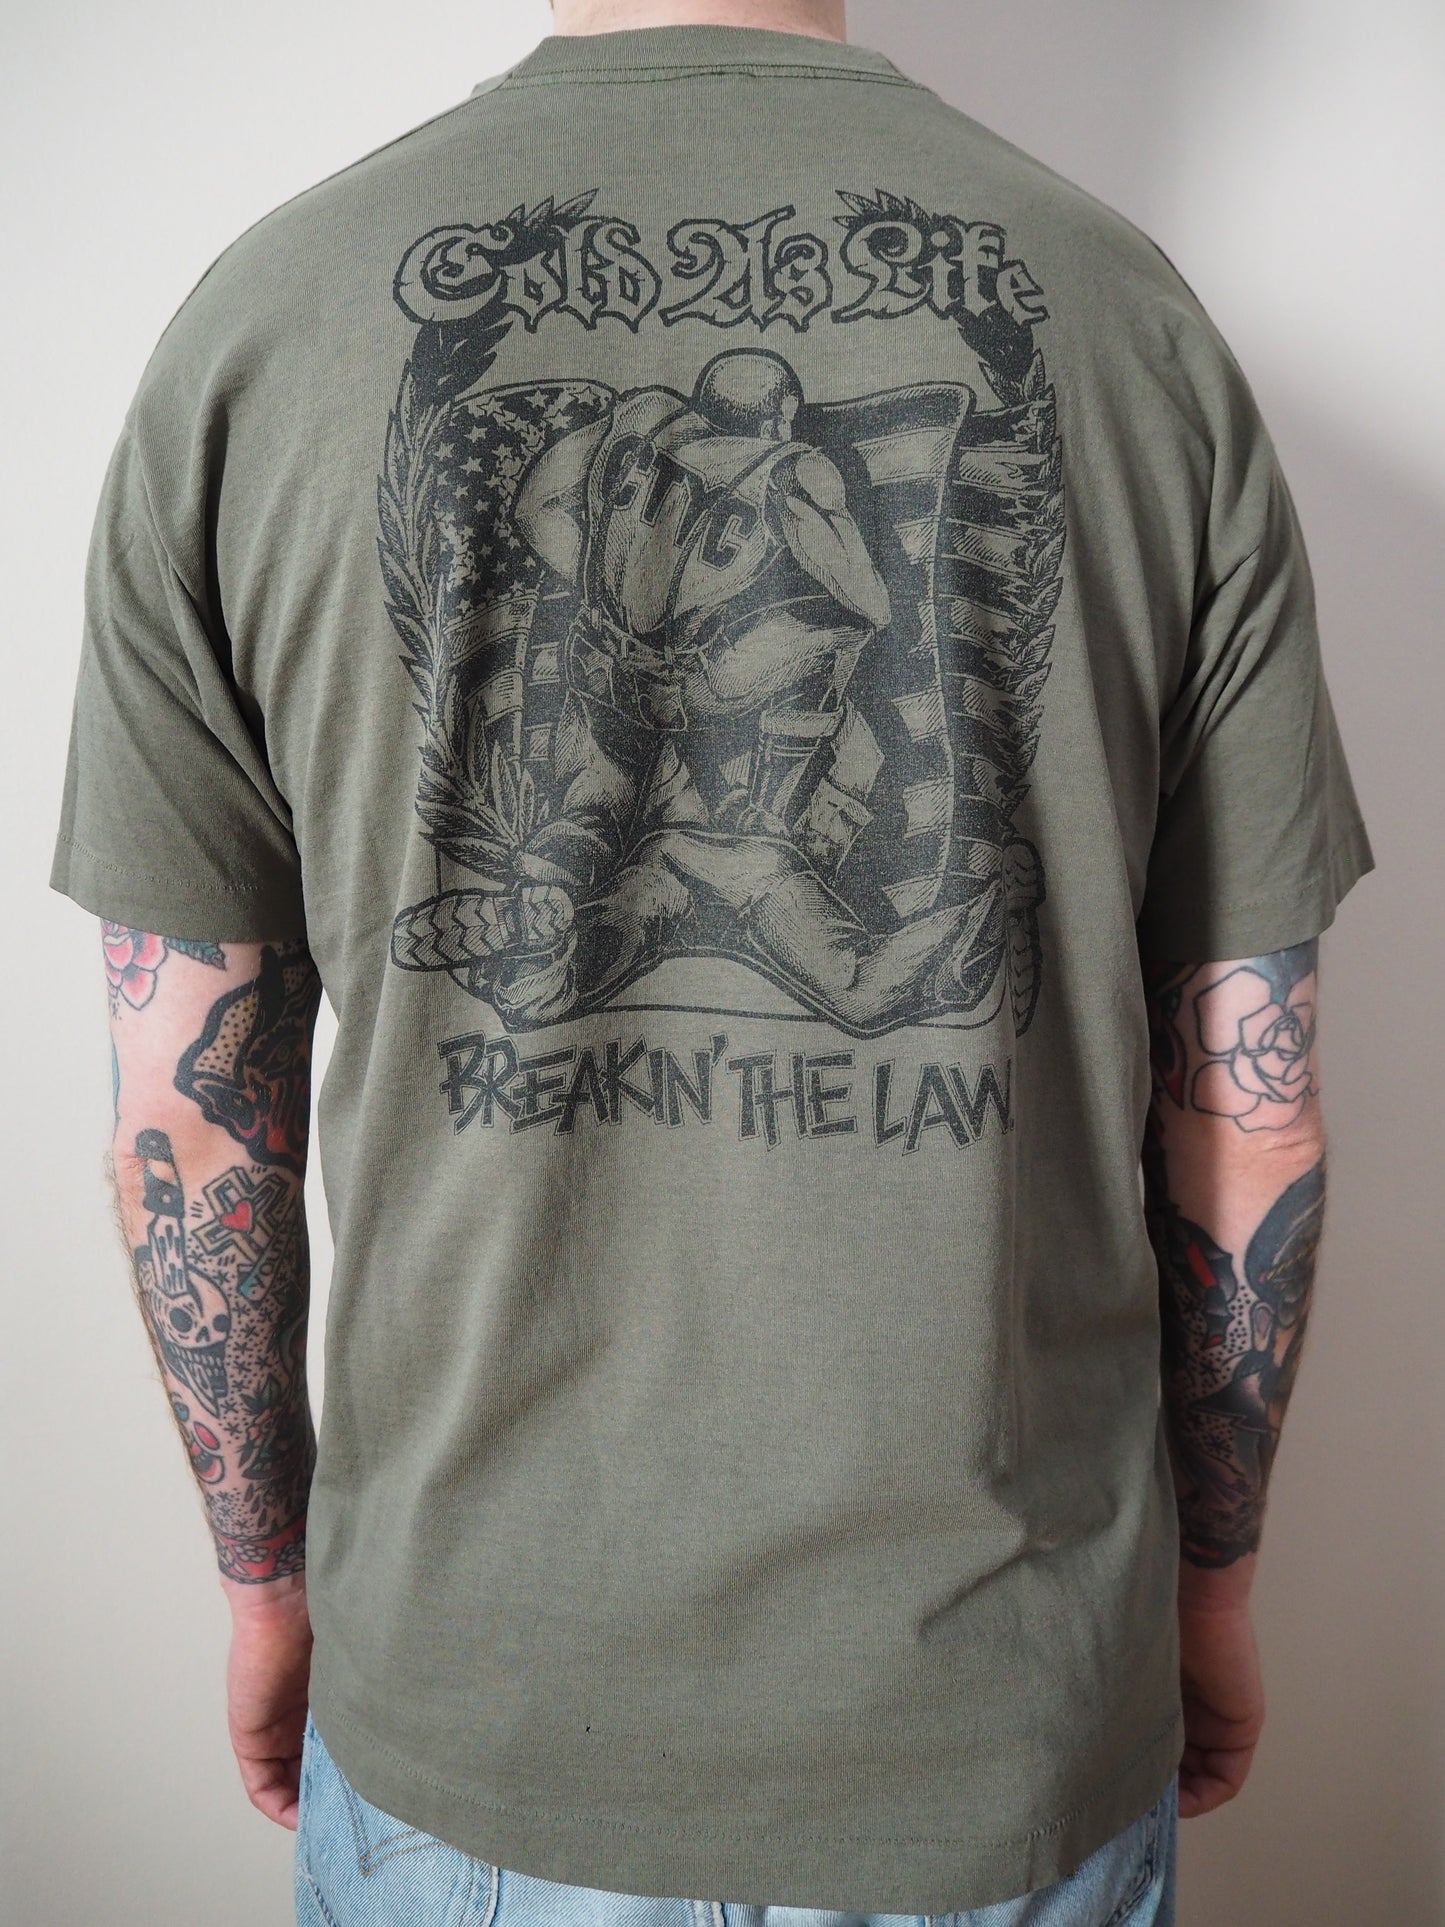 Late 80s/Early 90s Cold as Life "Breakin' the Law" t-shirt